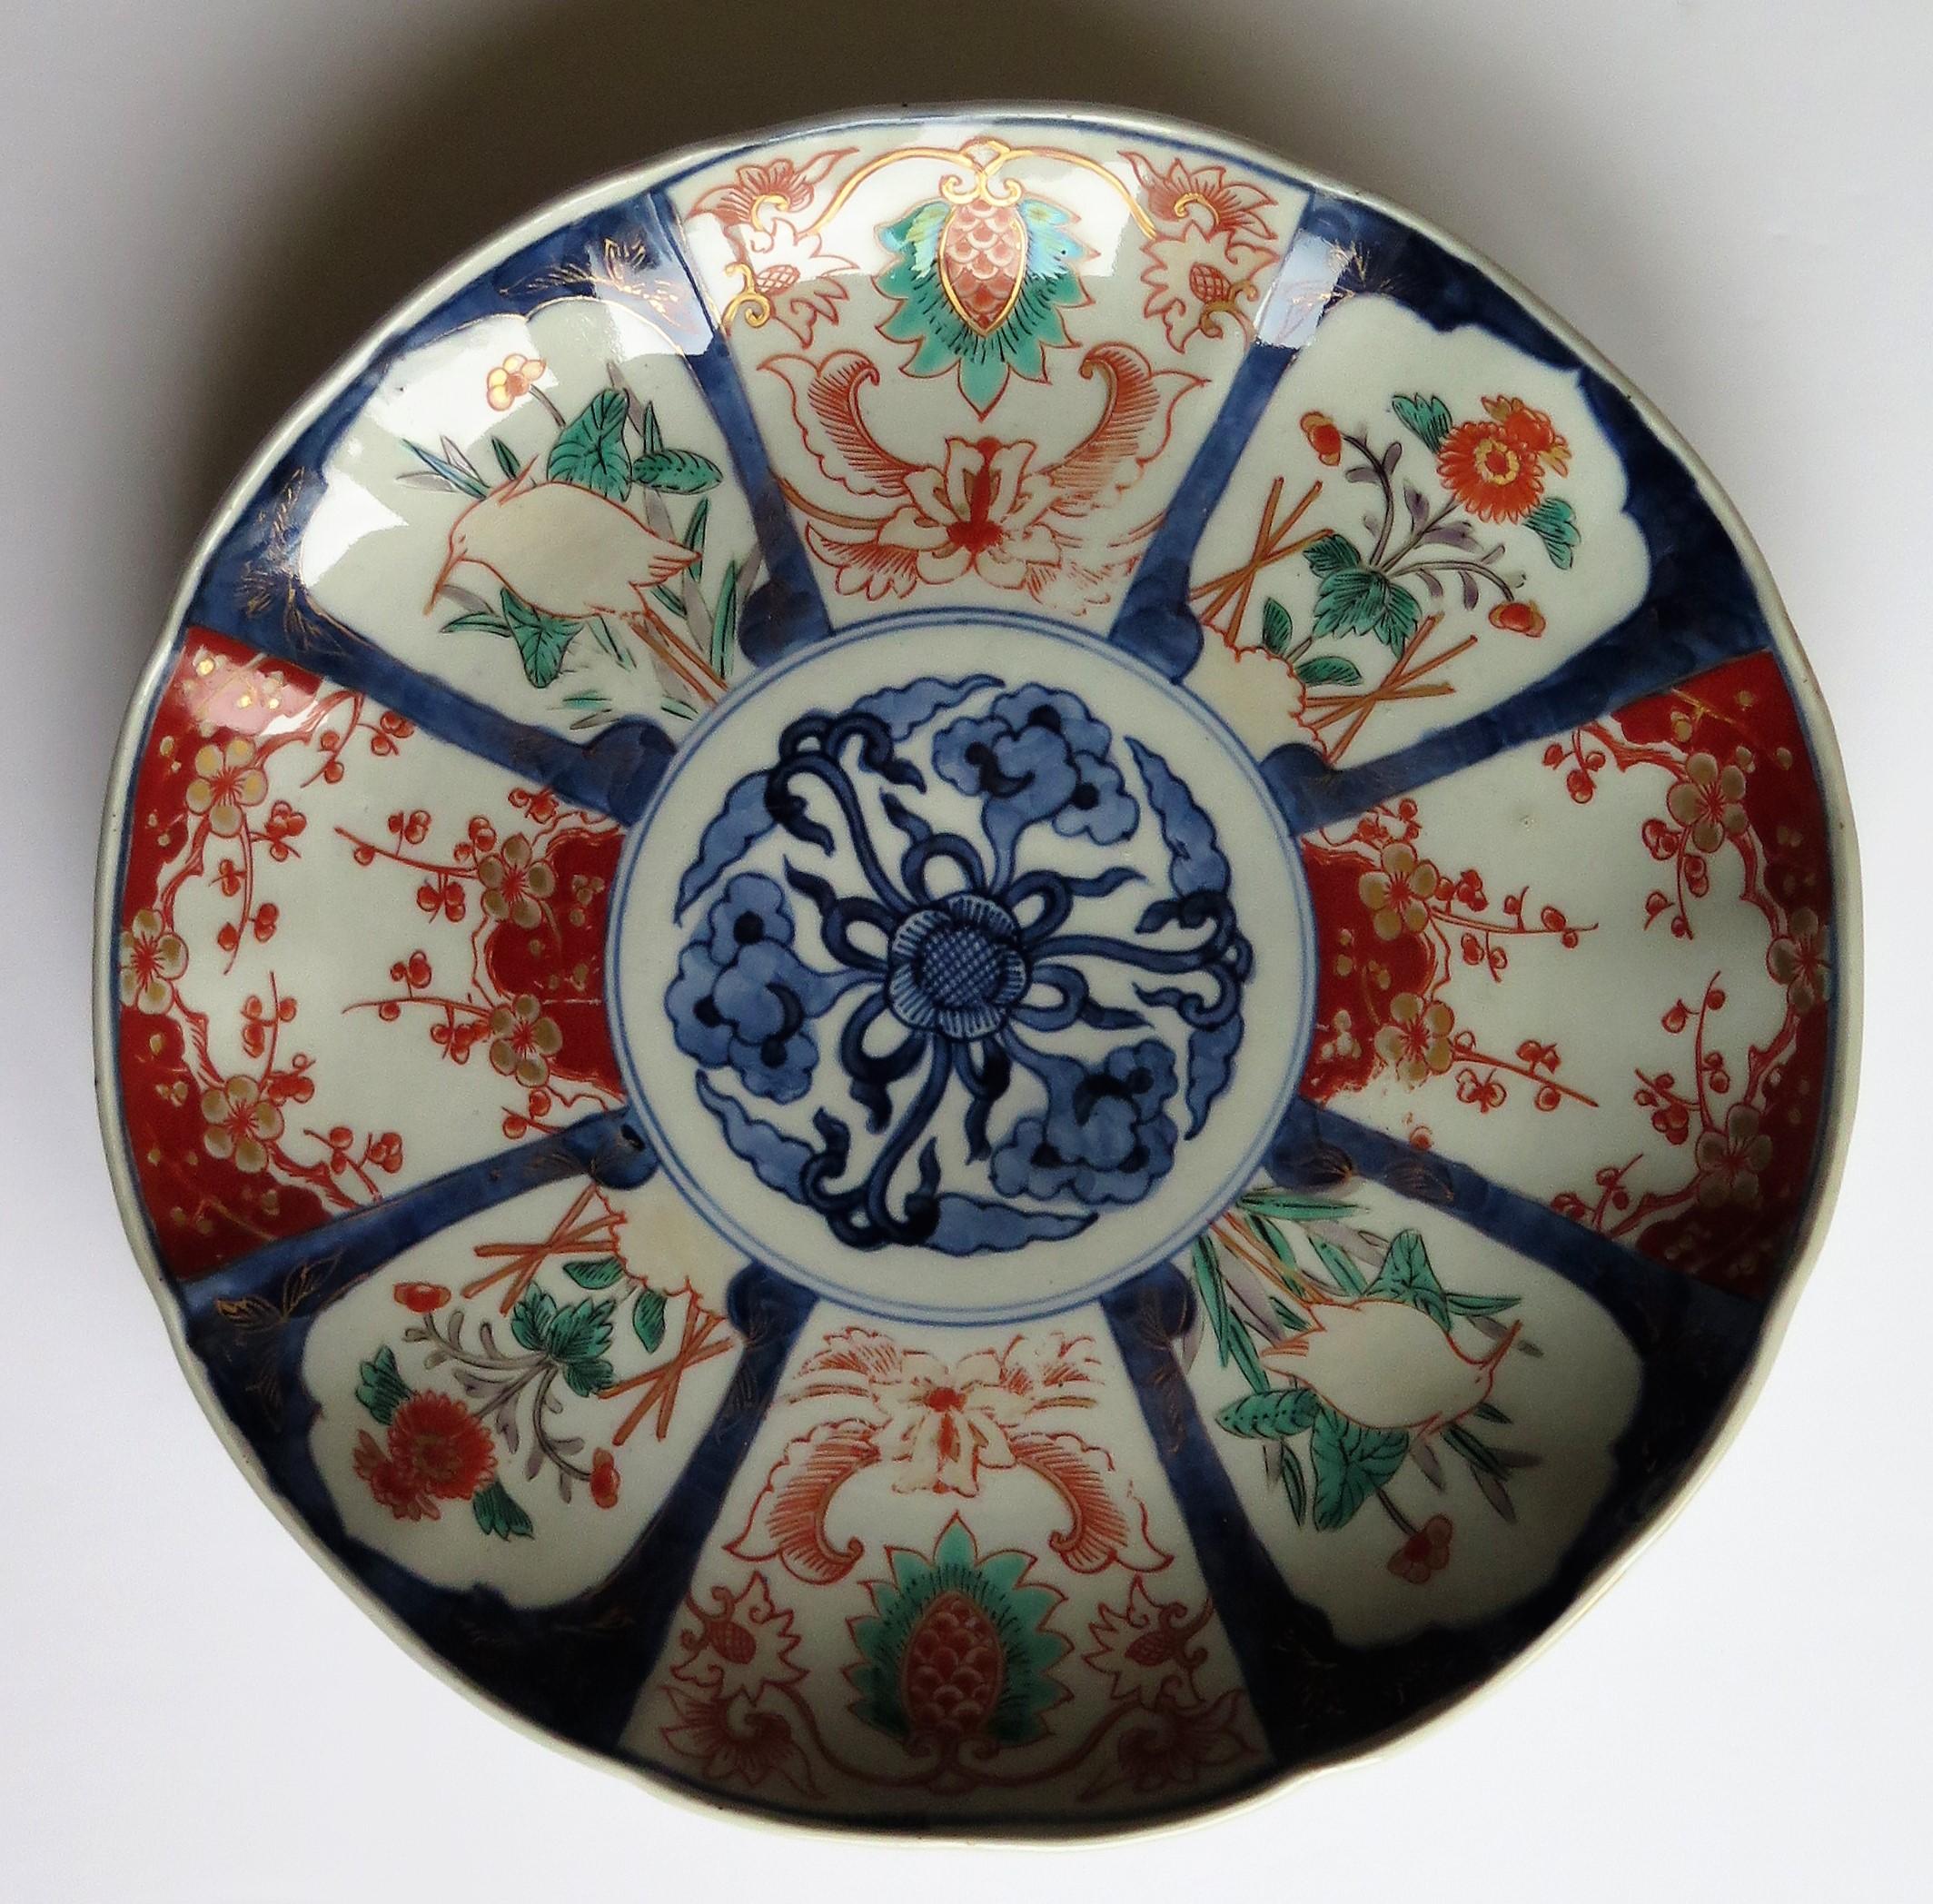 Japanese Porcelain Large Plate or Hand Painted Imari, 19th Century Meiji Period  1